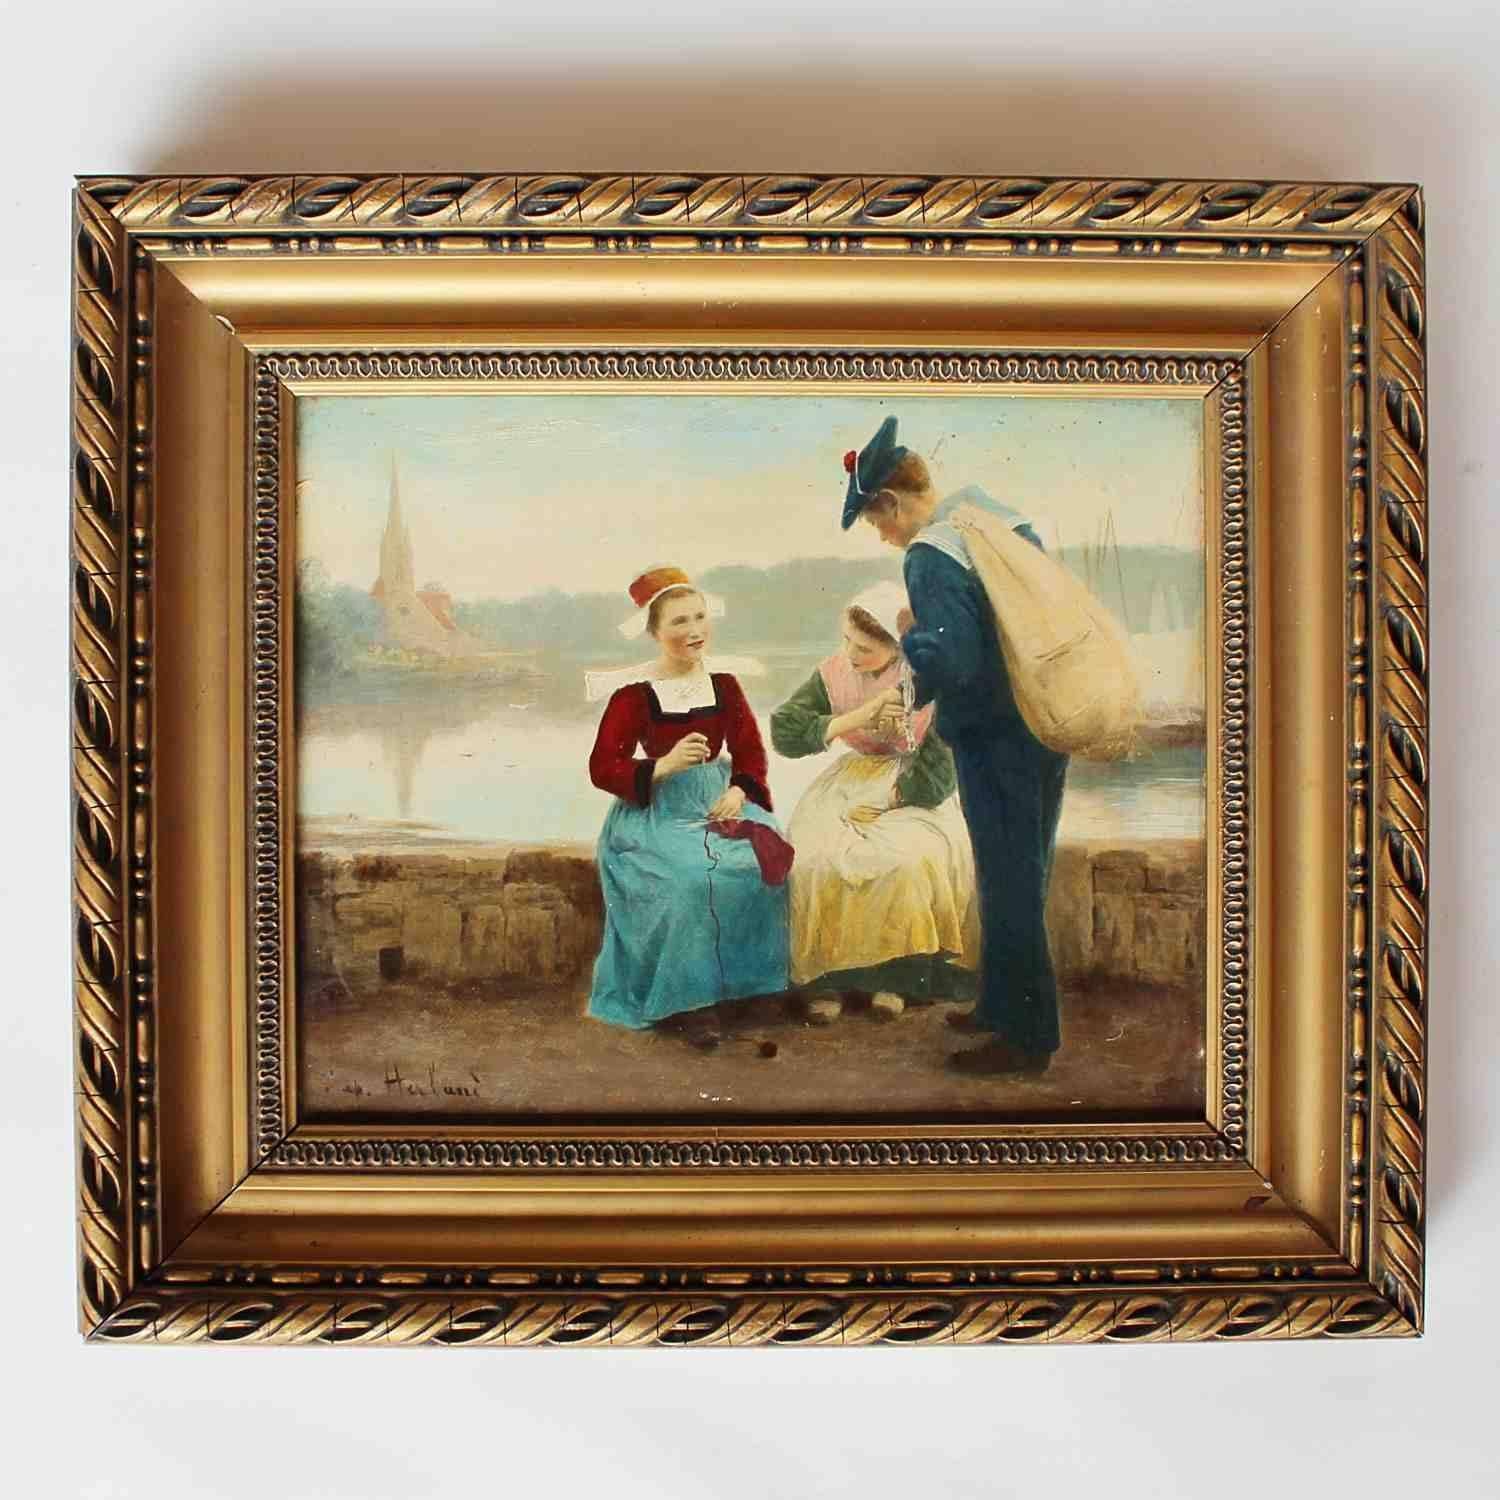 'Ladies with Sailor', an oil on canvas study of two ladies flirting with a young sailor. Se in a gilt frame. Signed E. Herland to lower left. 

Emma Herland was born in Cherbourg and became a pupil of Jules Lefabvre and Benjamin Constant. She